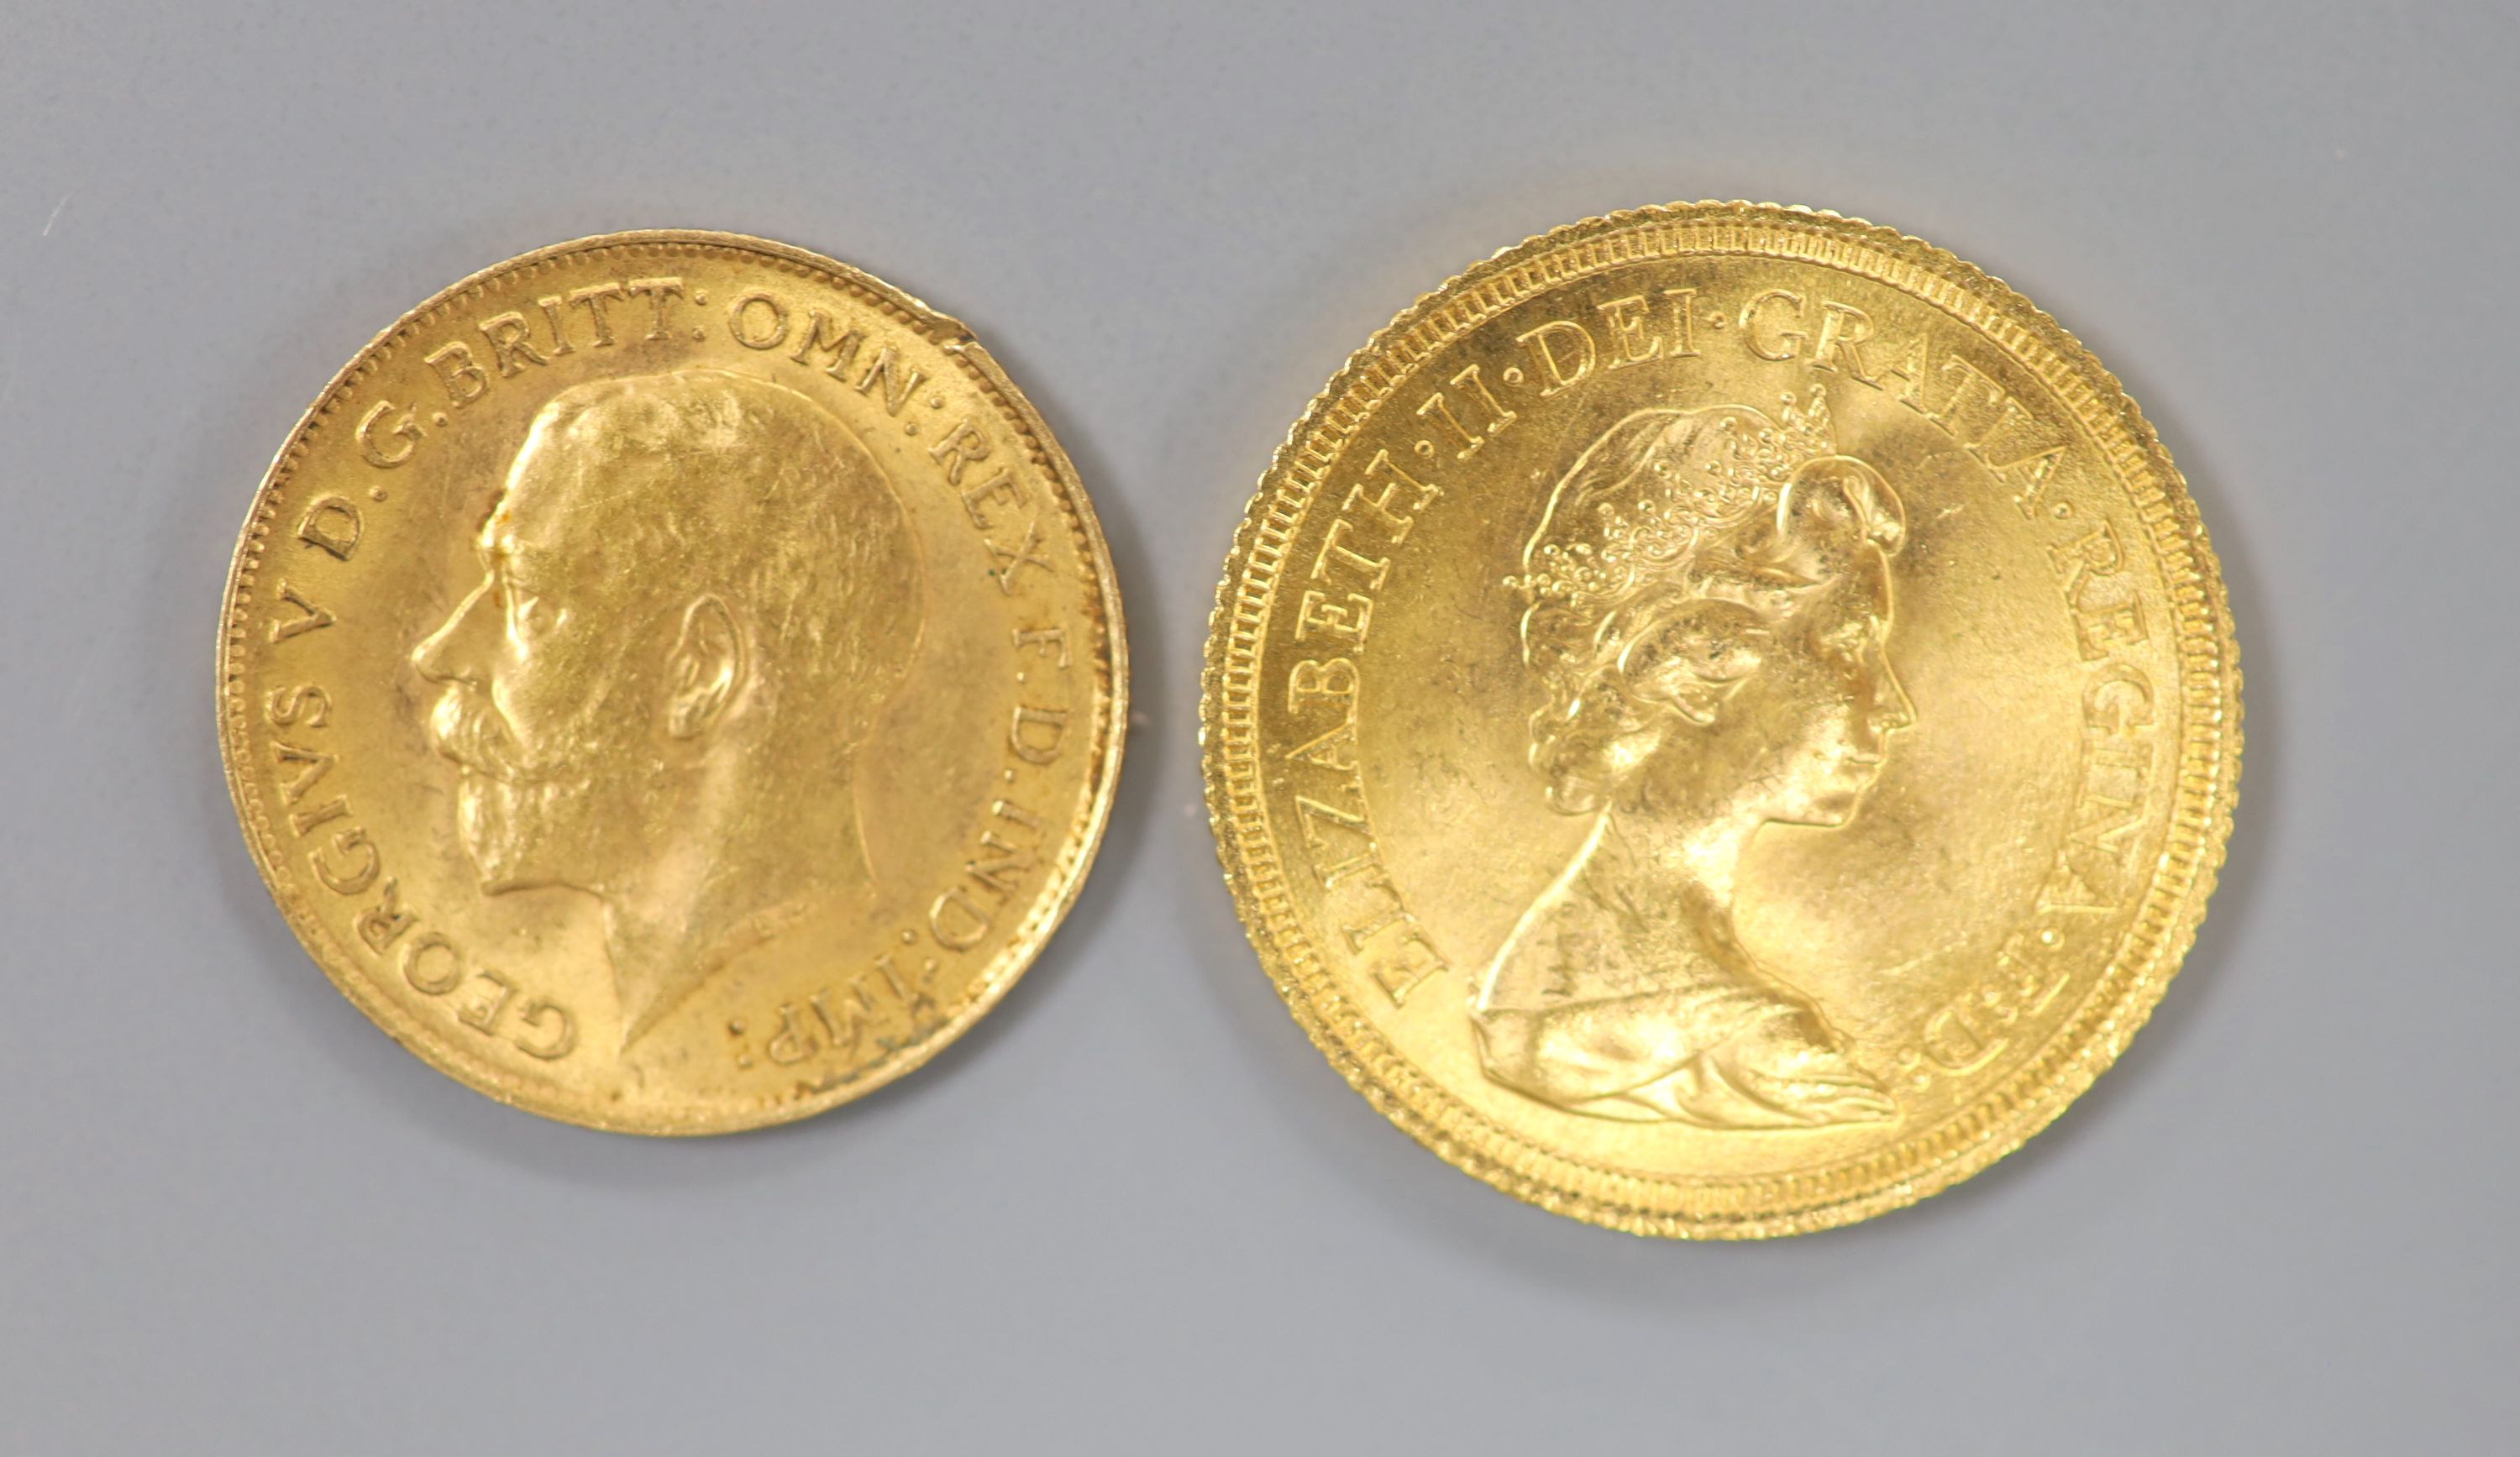 An Elizabeth II 1974 gold sovereign and a George V 1912 gold half sovereign.